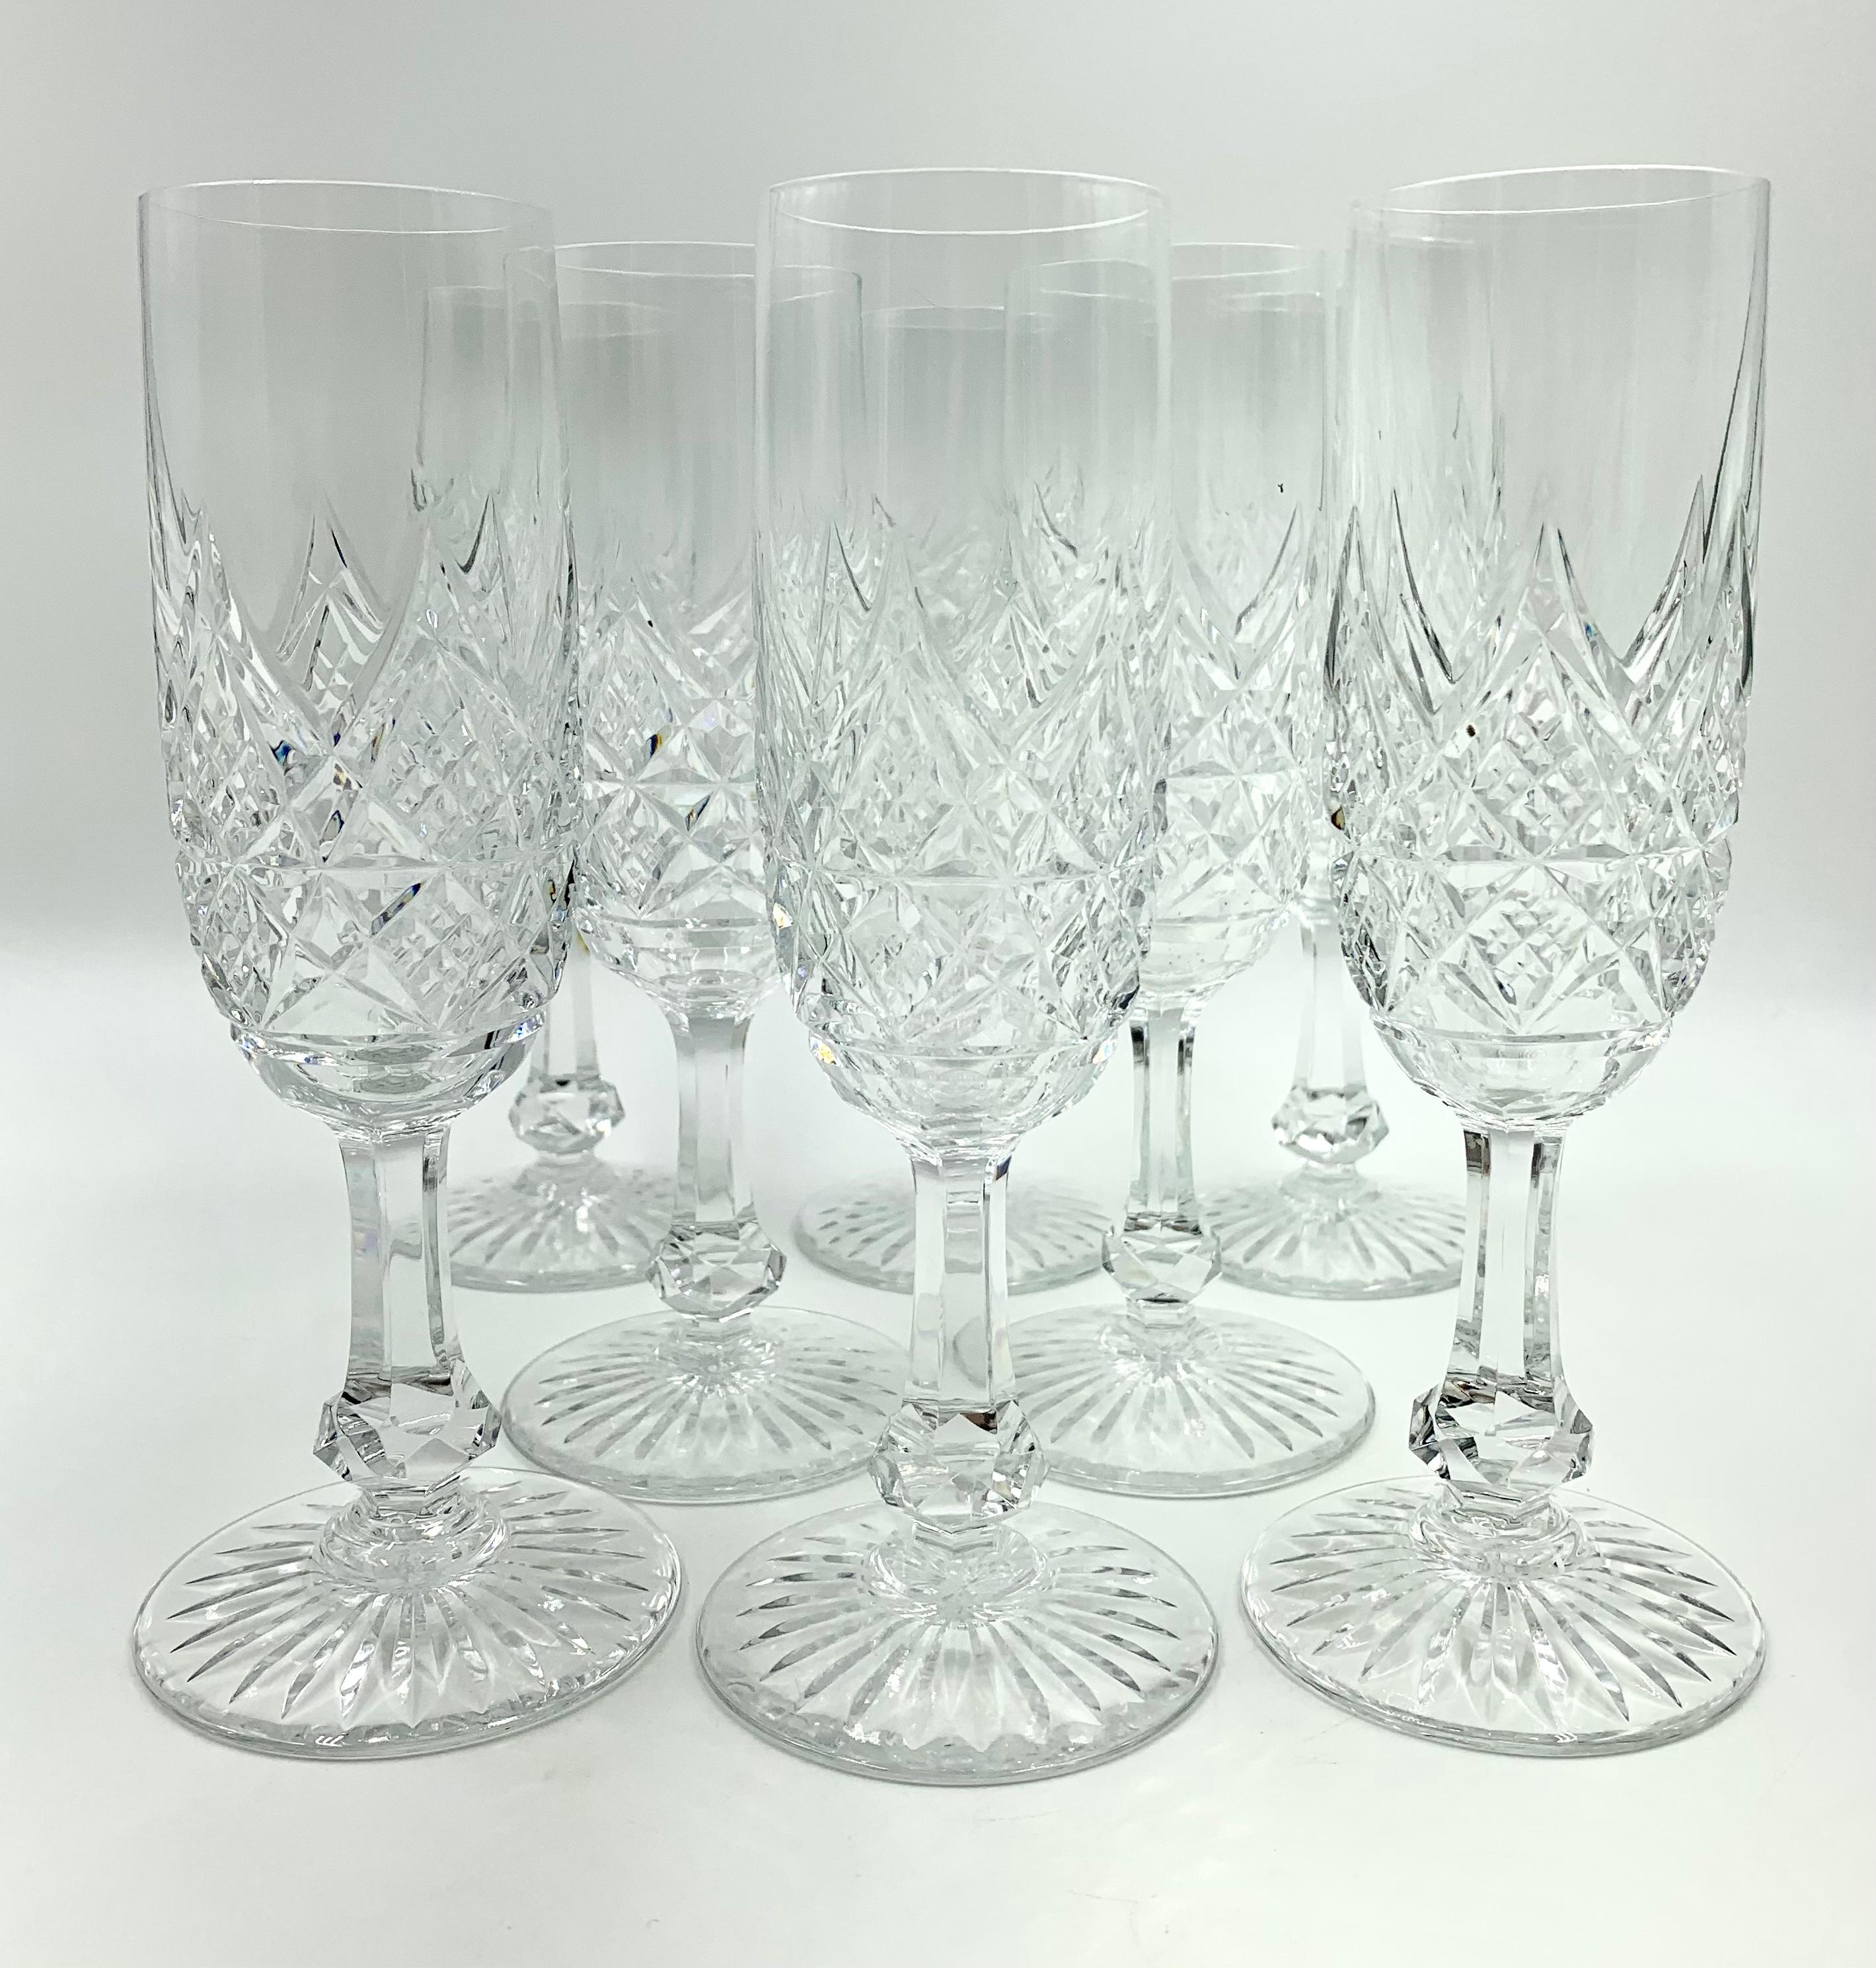 Rare Luxurious 24 Piece Baccarat Colbert Stemware Service for Eight For Sale 2